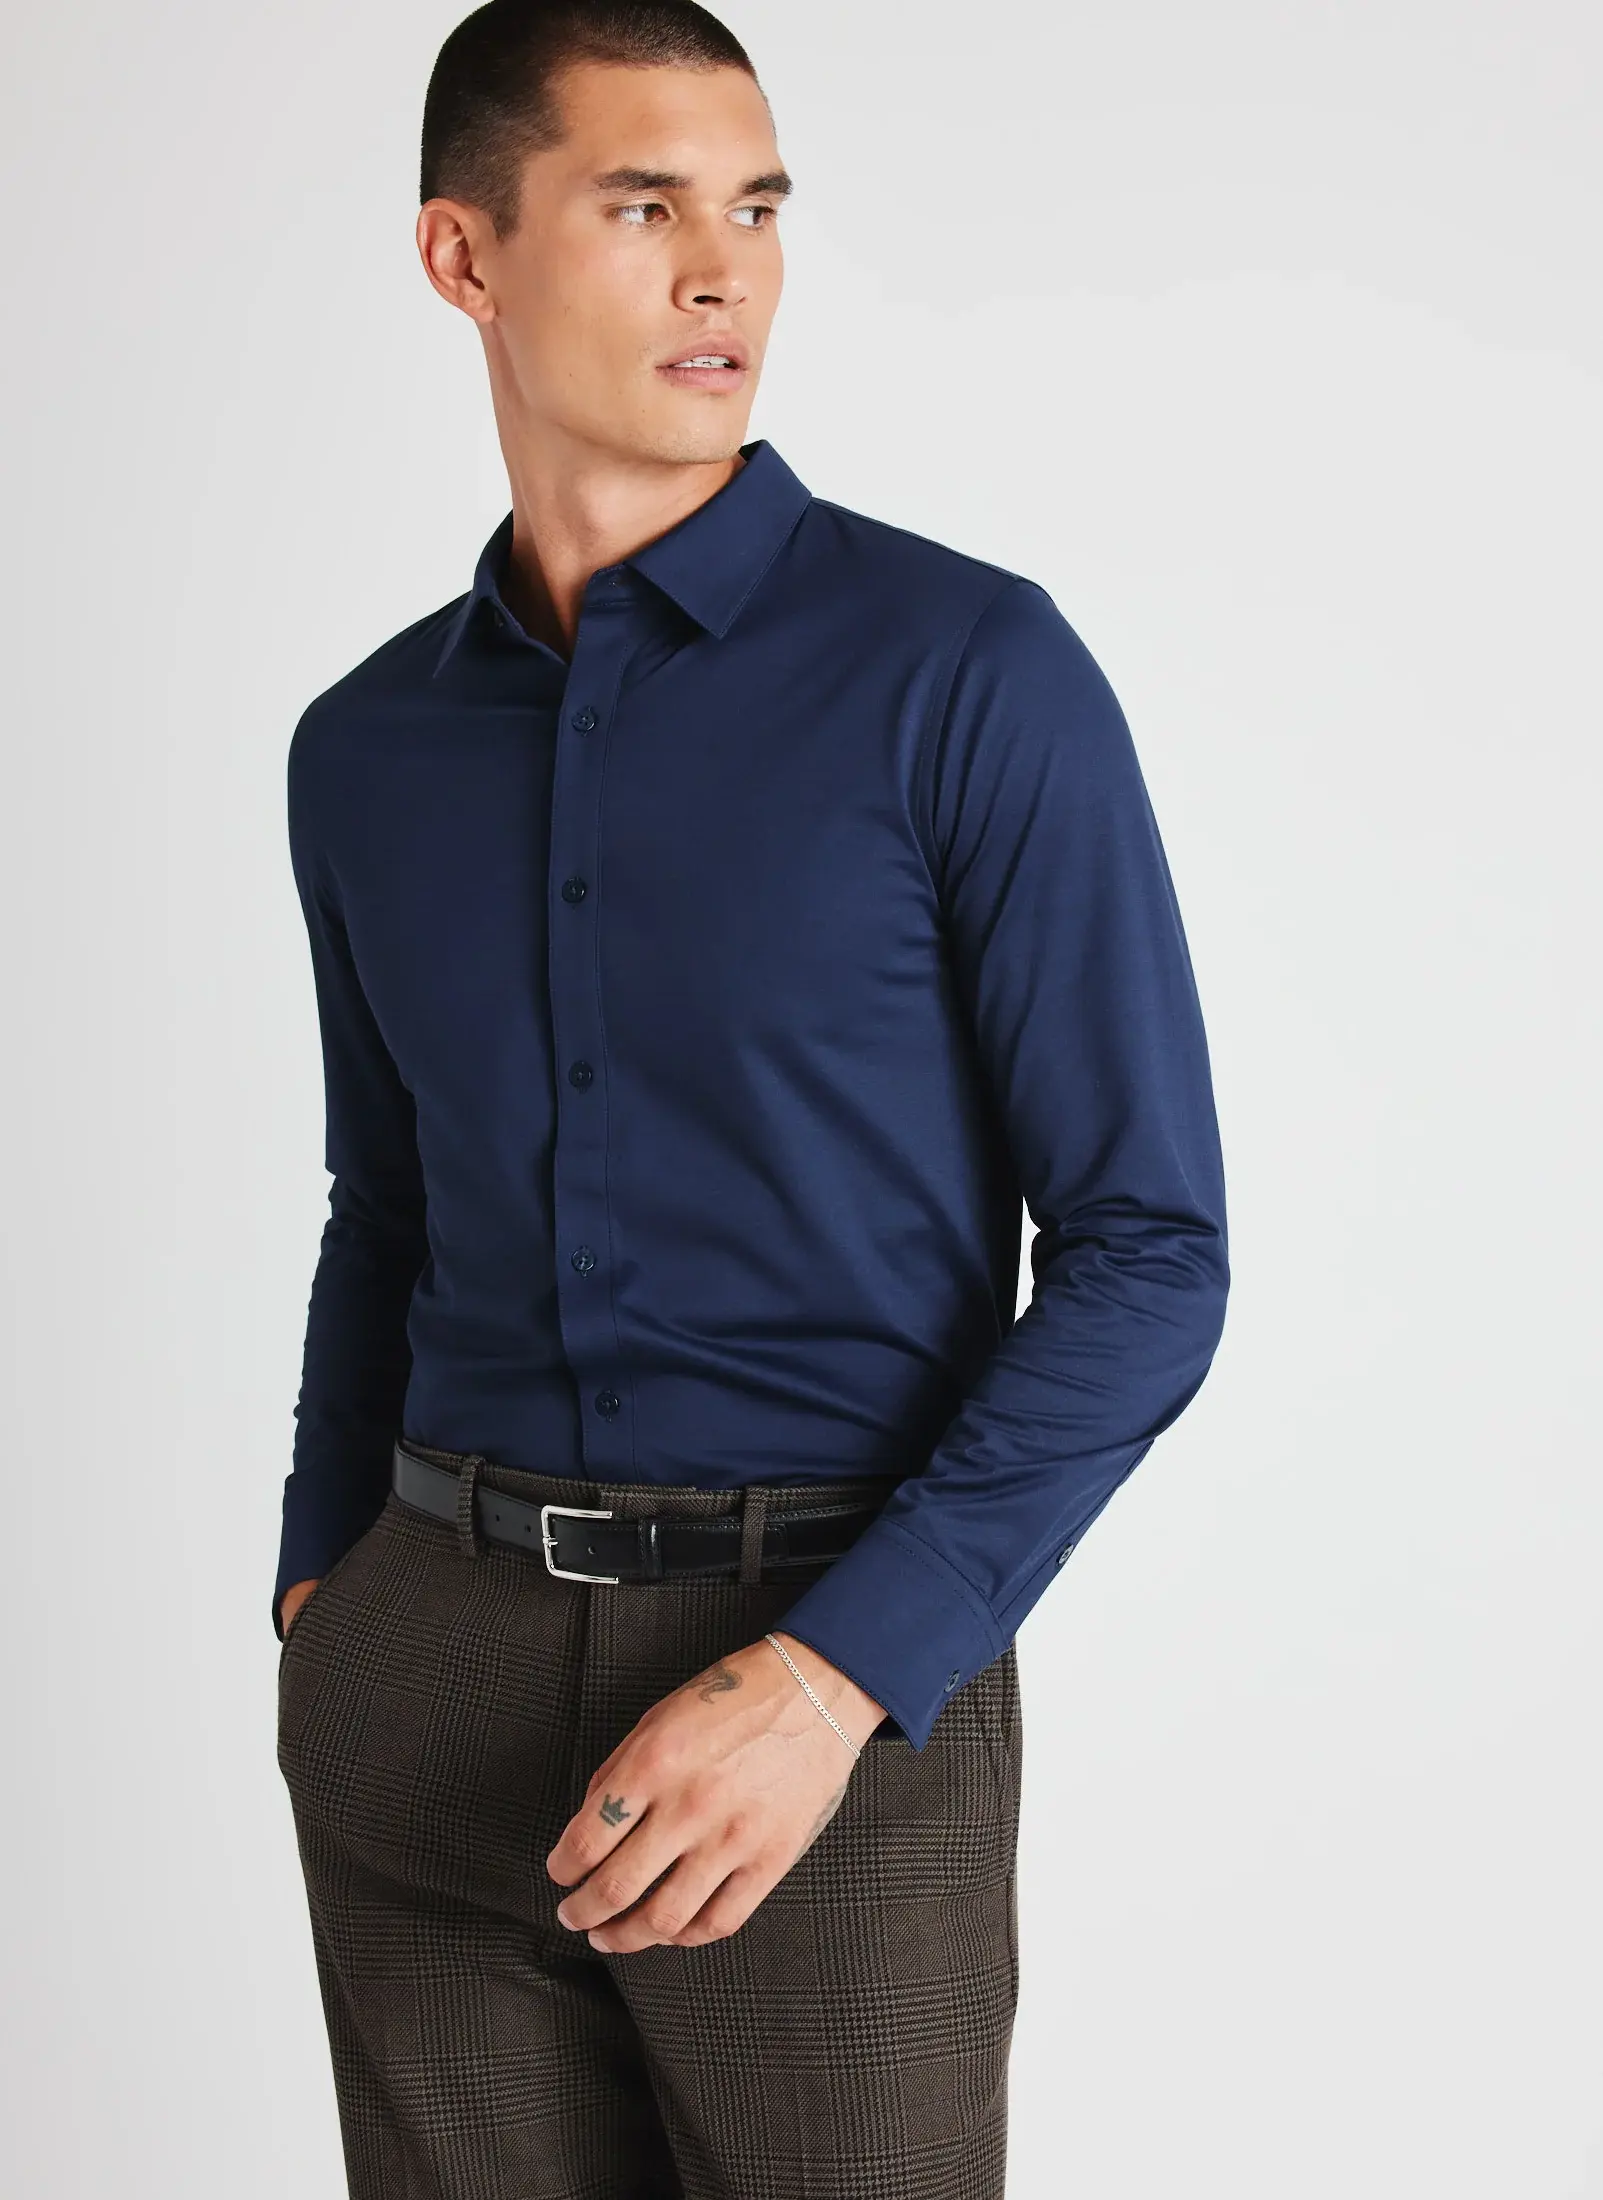 Kit And Ace City Tech Shirt Slim Fit. 1